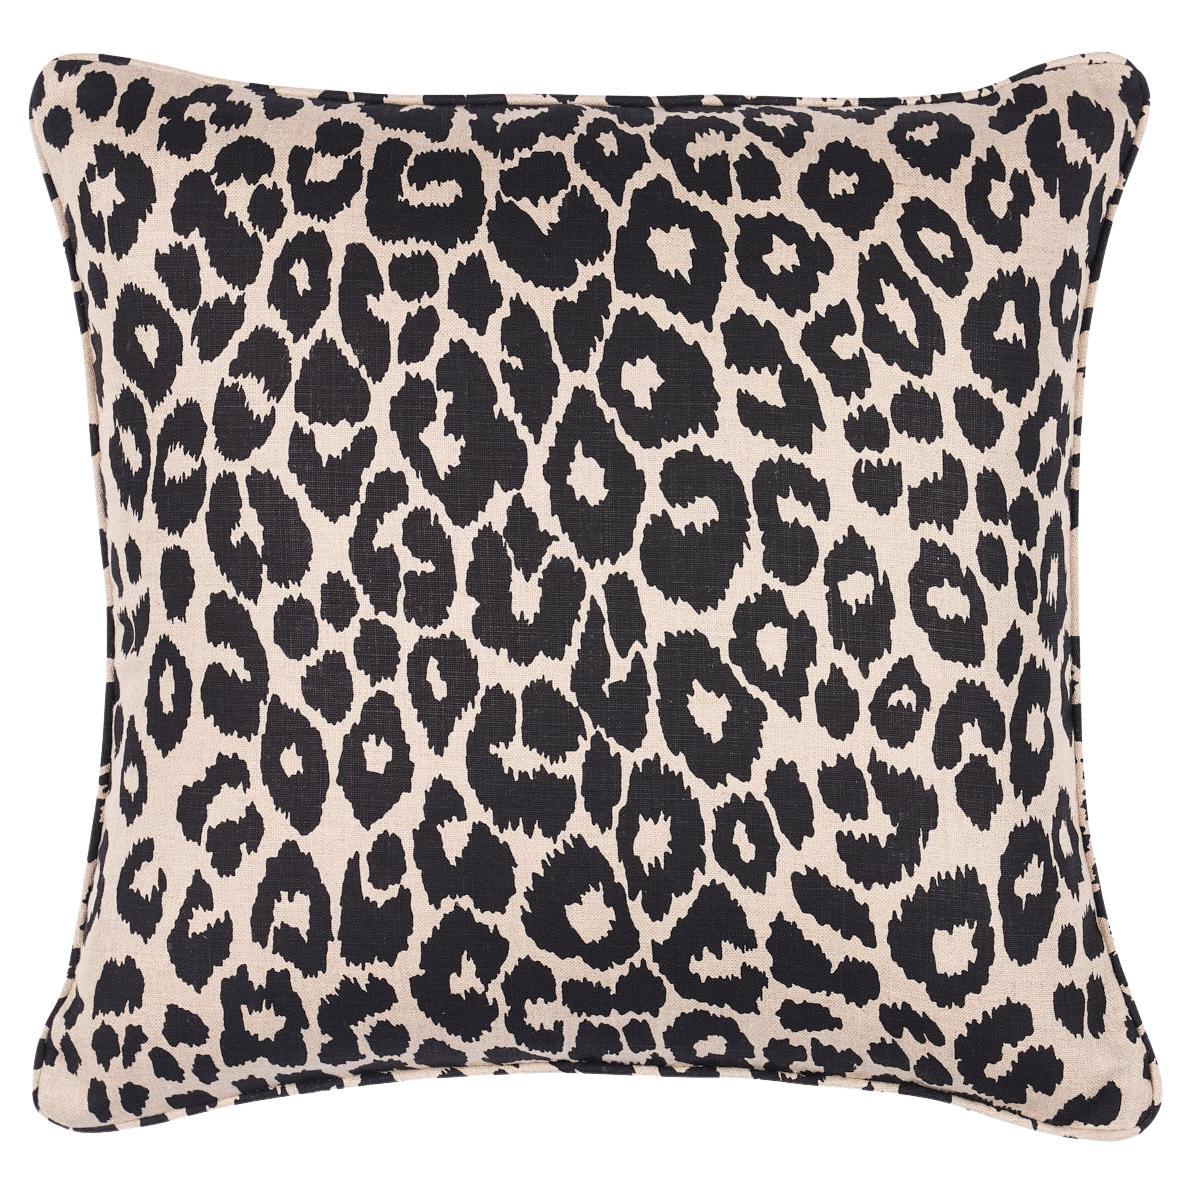 Schumacher Iconic Leopard 20" Pillow in Ebony/Natural